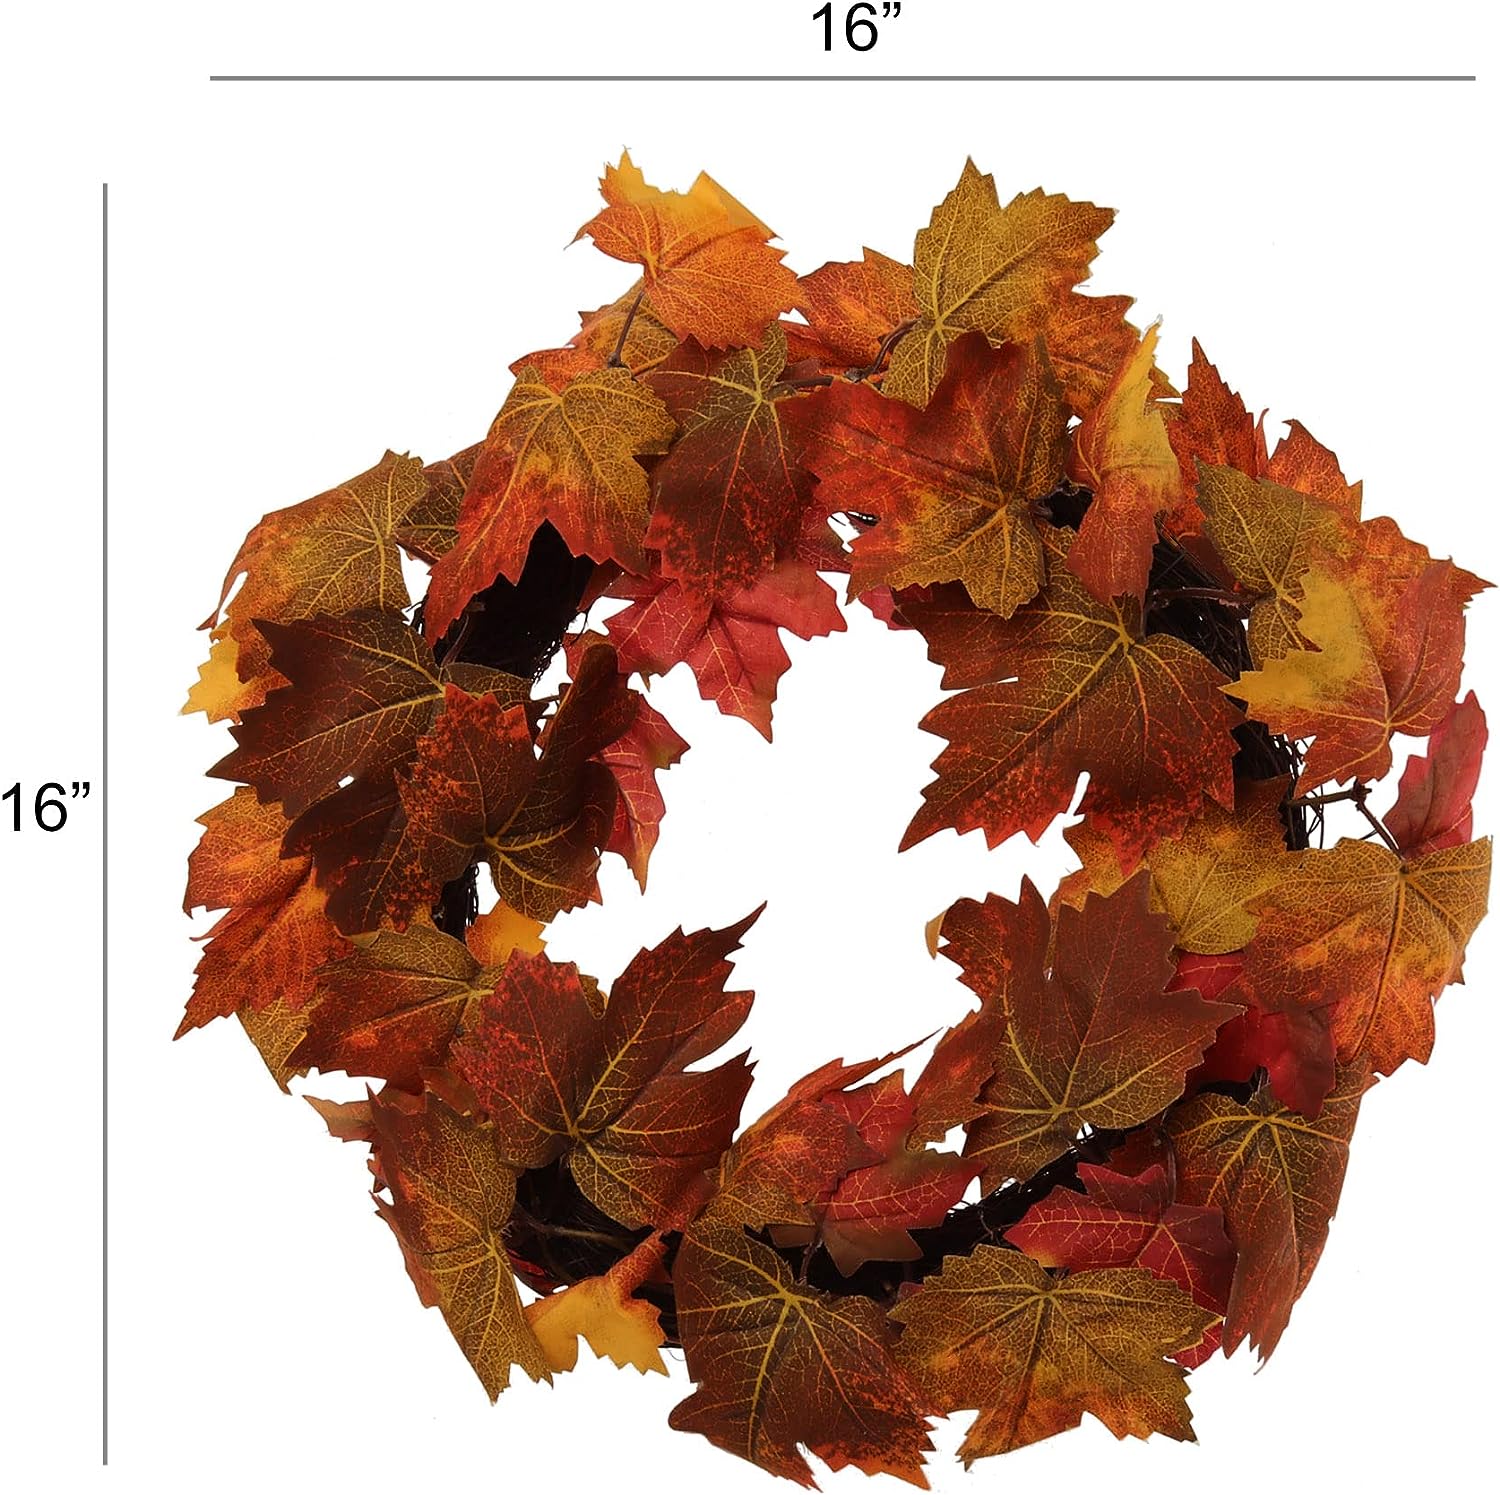 Autumn Maple Leaf Wreath - 16-Inch Wide Silk Fall Wreaths - Grapevine Base for Outdoor and Front Door - Thanksgiving Decor - Perfect for Home and Office Decoration